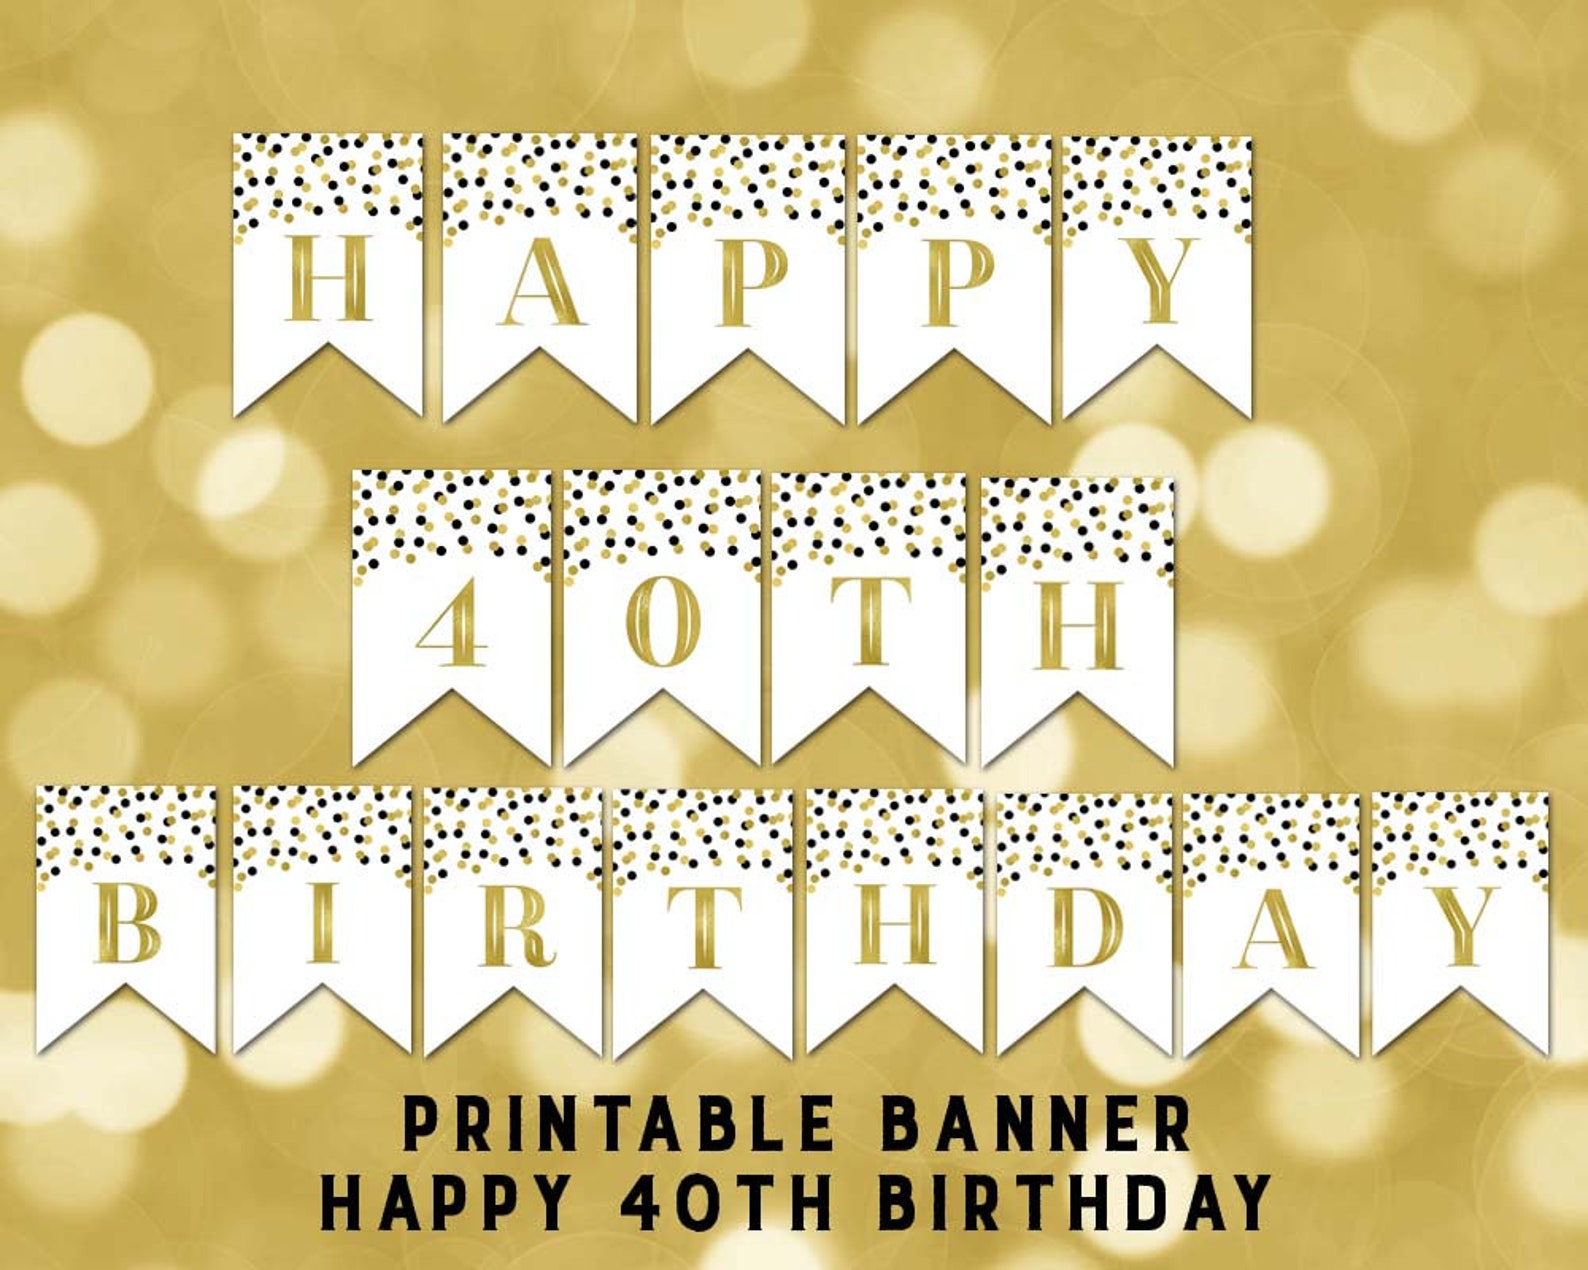 Happy Birthday Banner Printable Template Paper Trail Design 